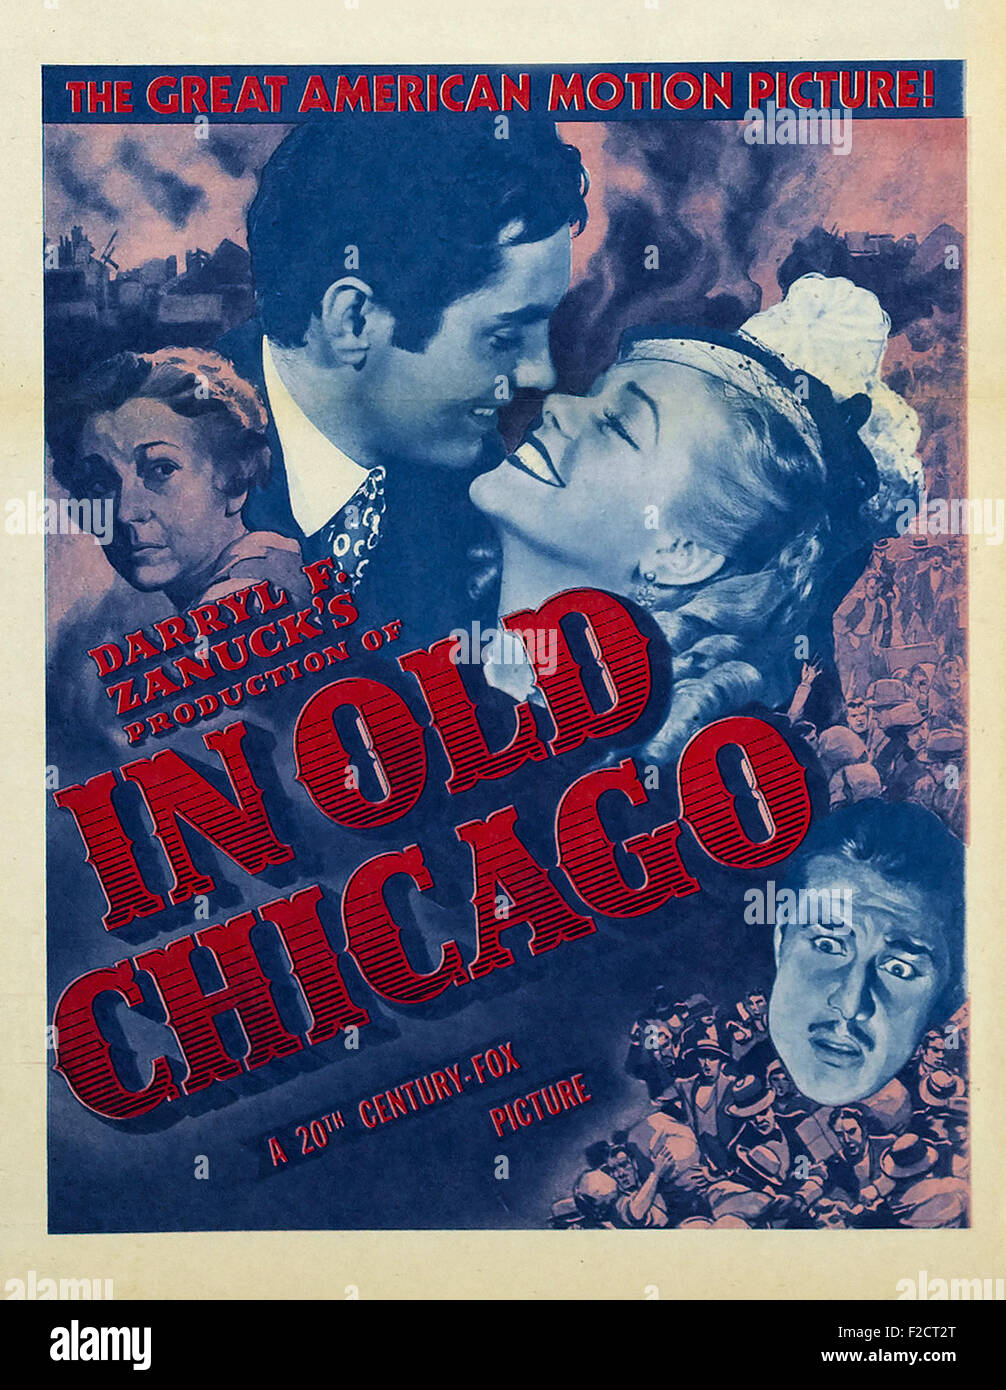 In Old Chicago 04 - Movie Poster Stock Photo